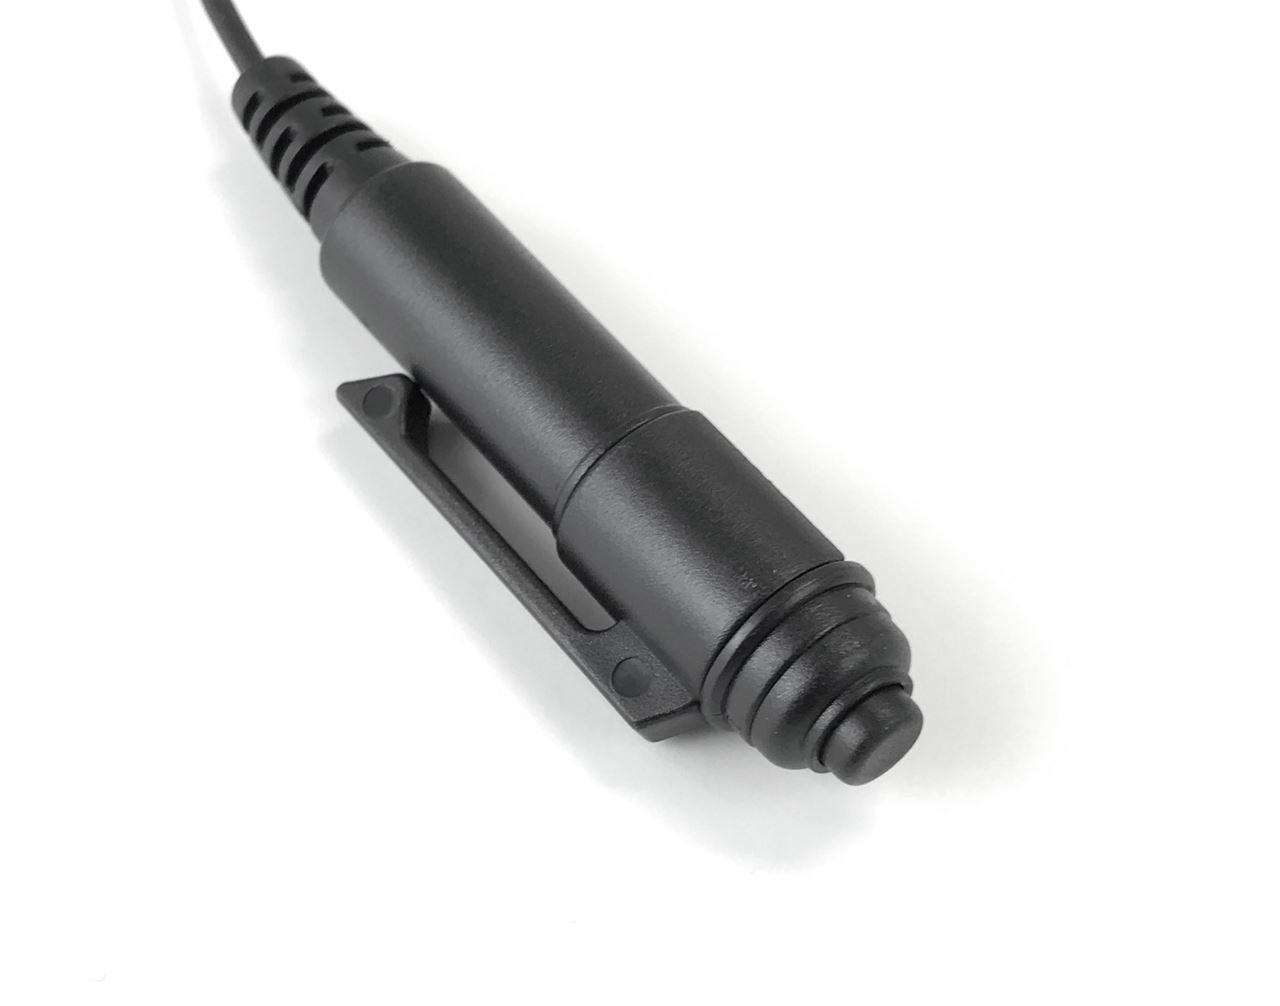 Comparable KHS-12 3 wire mini lapel mic with earphone for use with the Kenwood NX-5300 Portable Radio - Waveband Communications